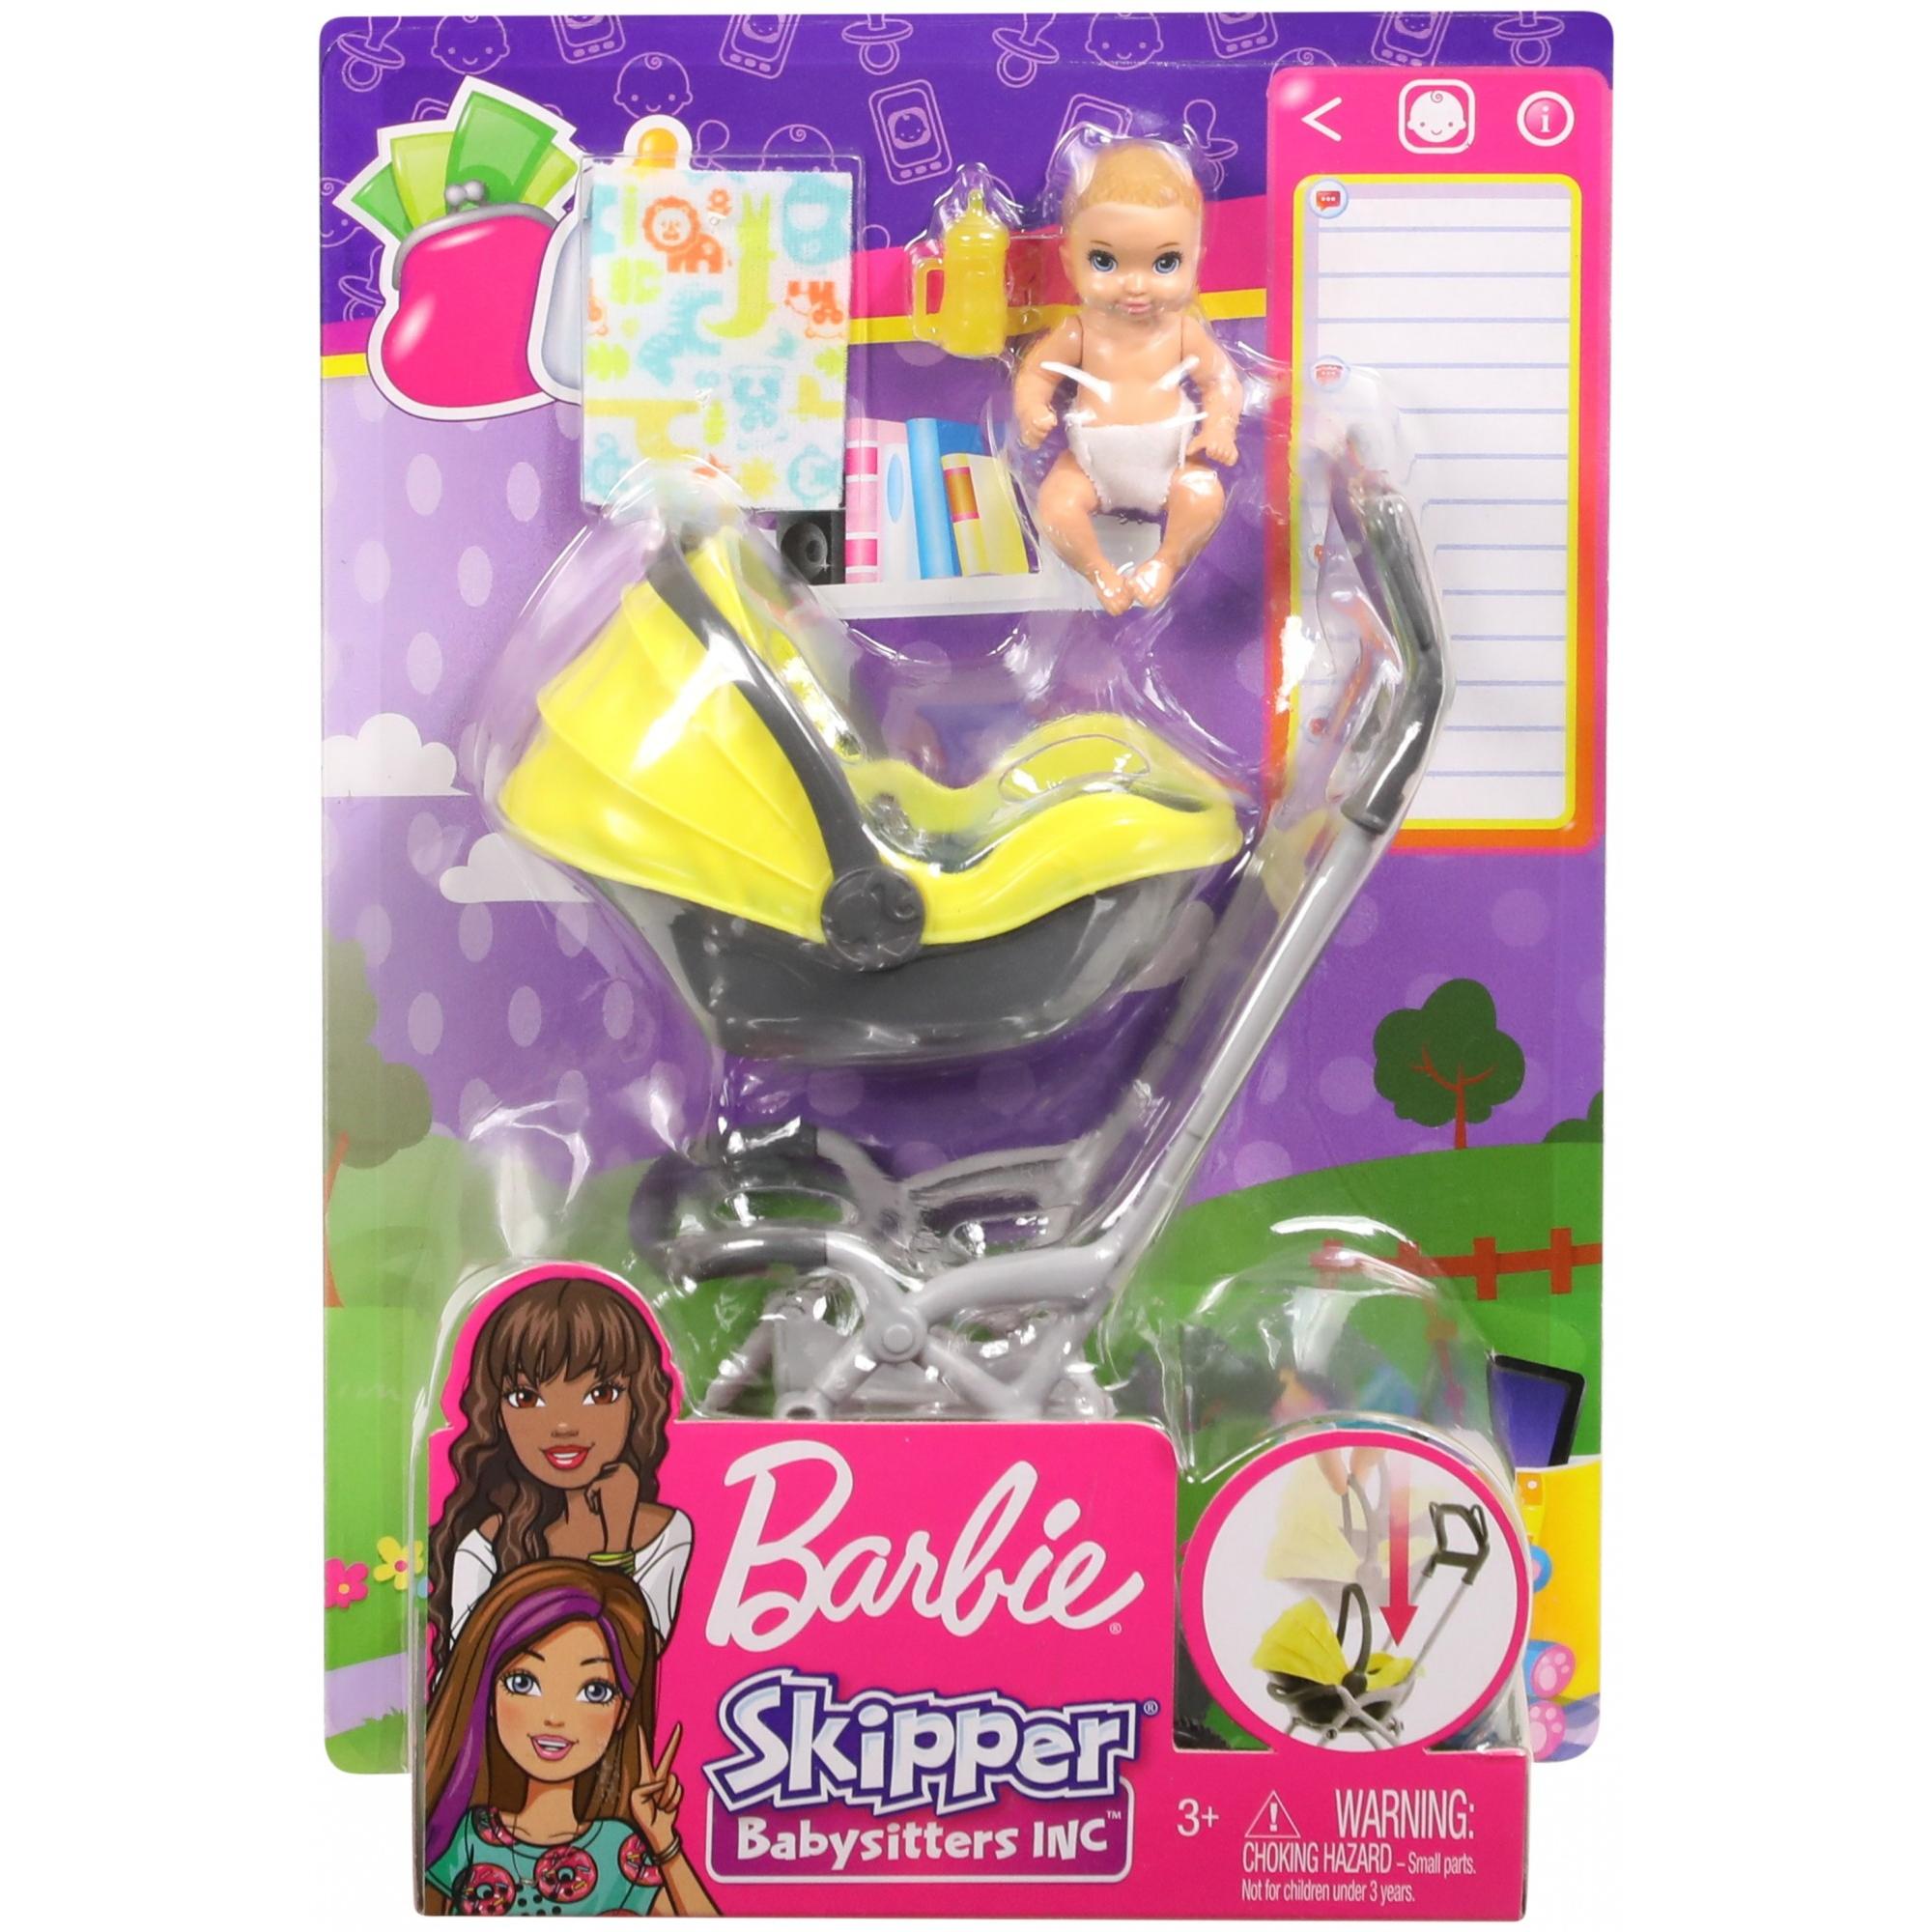 Barbie Skipper Babysitters Inc. Doll and Playset, Small Baby Doll with 2-in-1 Stroller - image 5 of 6